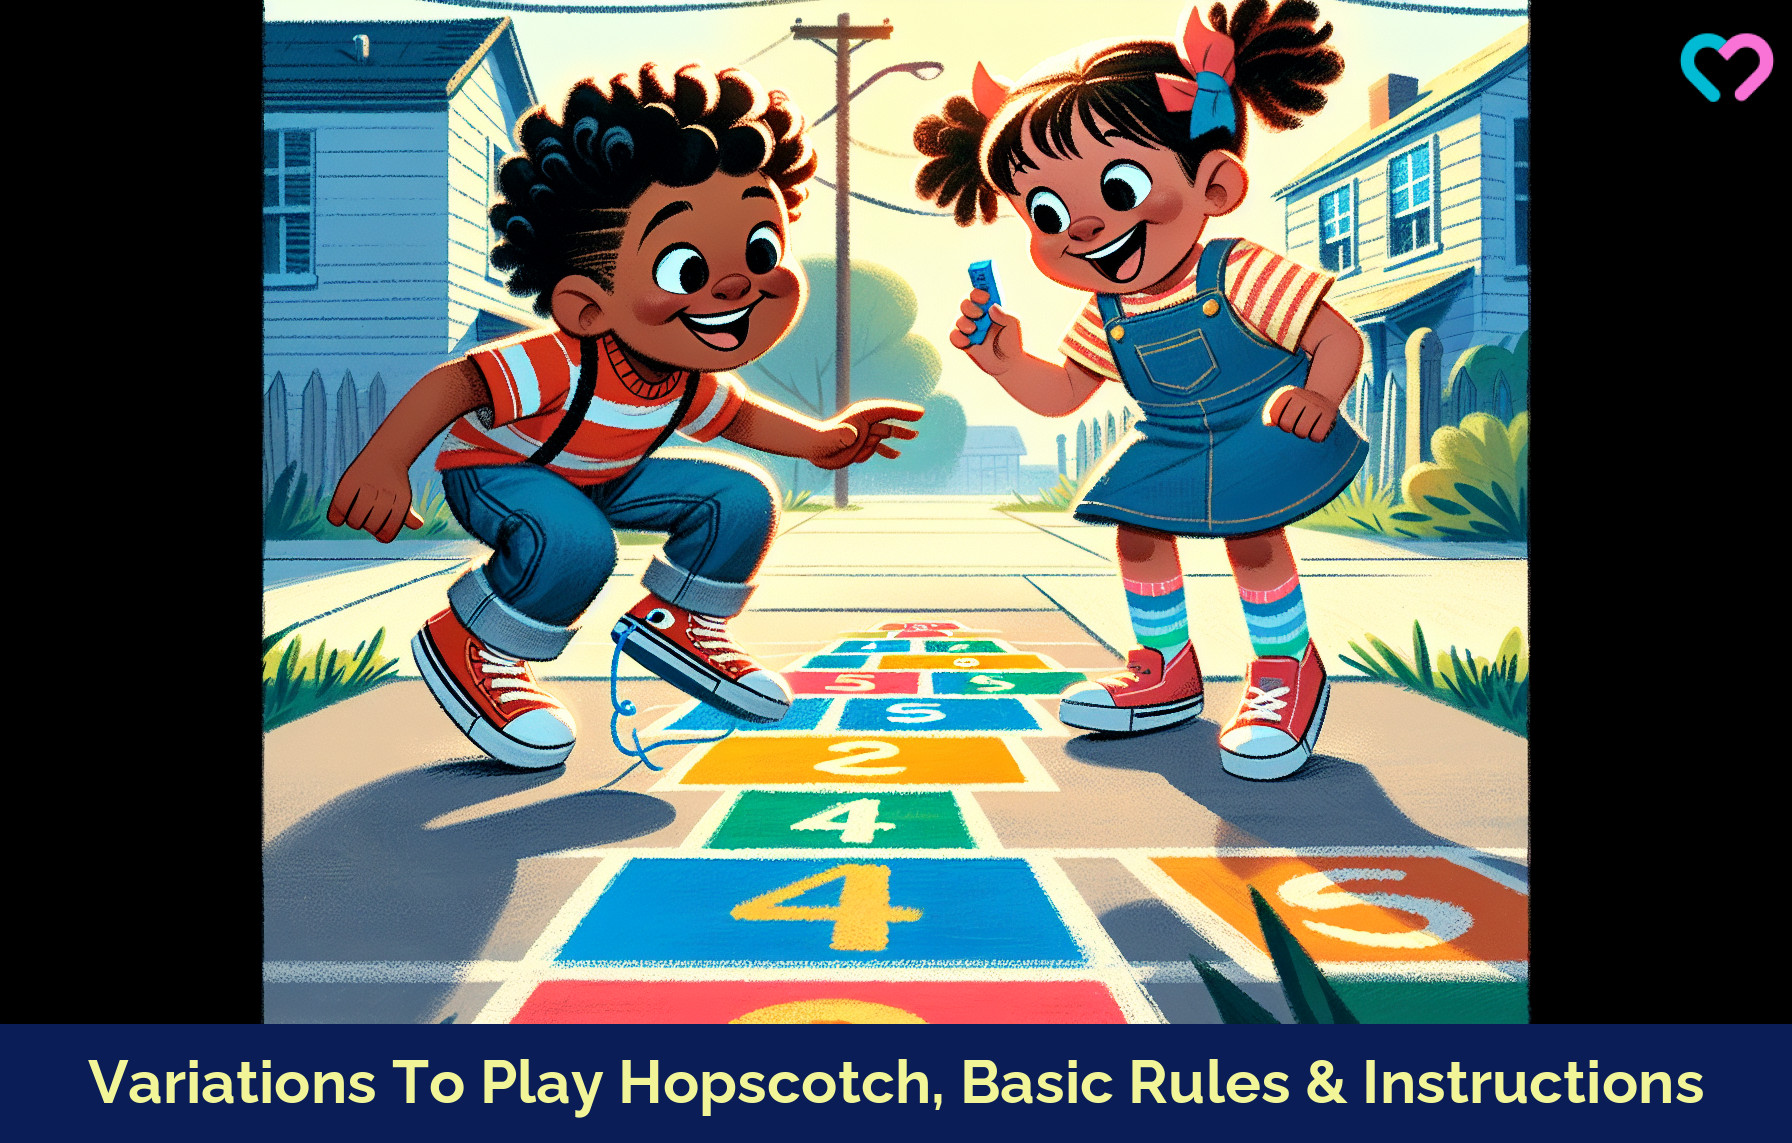 How To Play Hopscotch_illustration